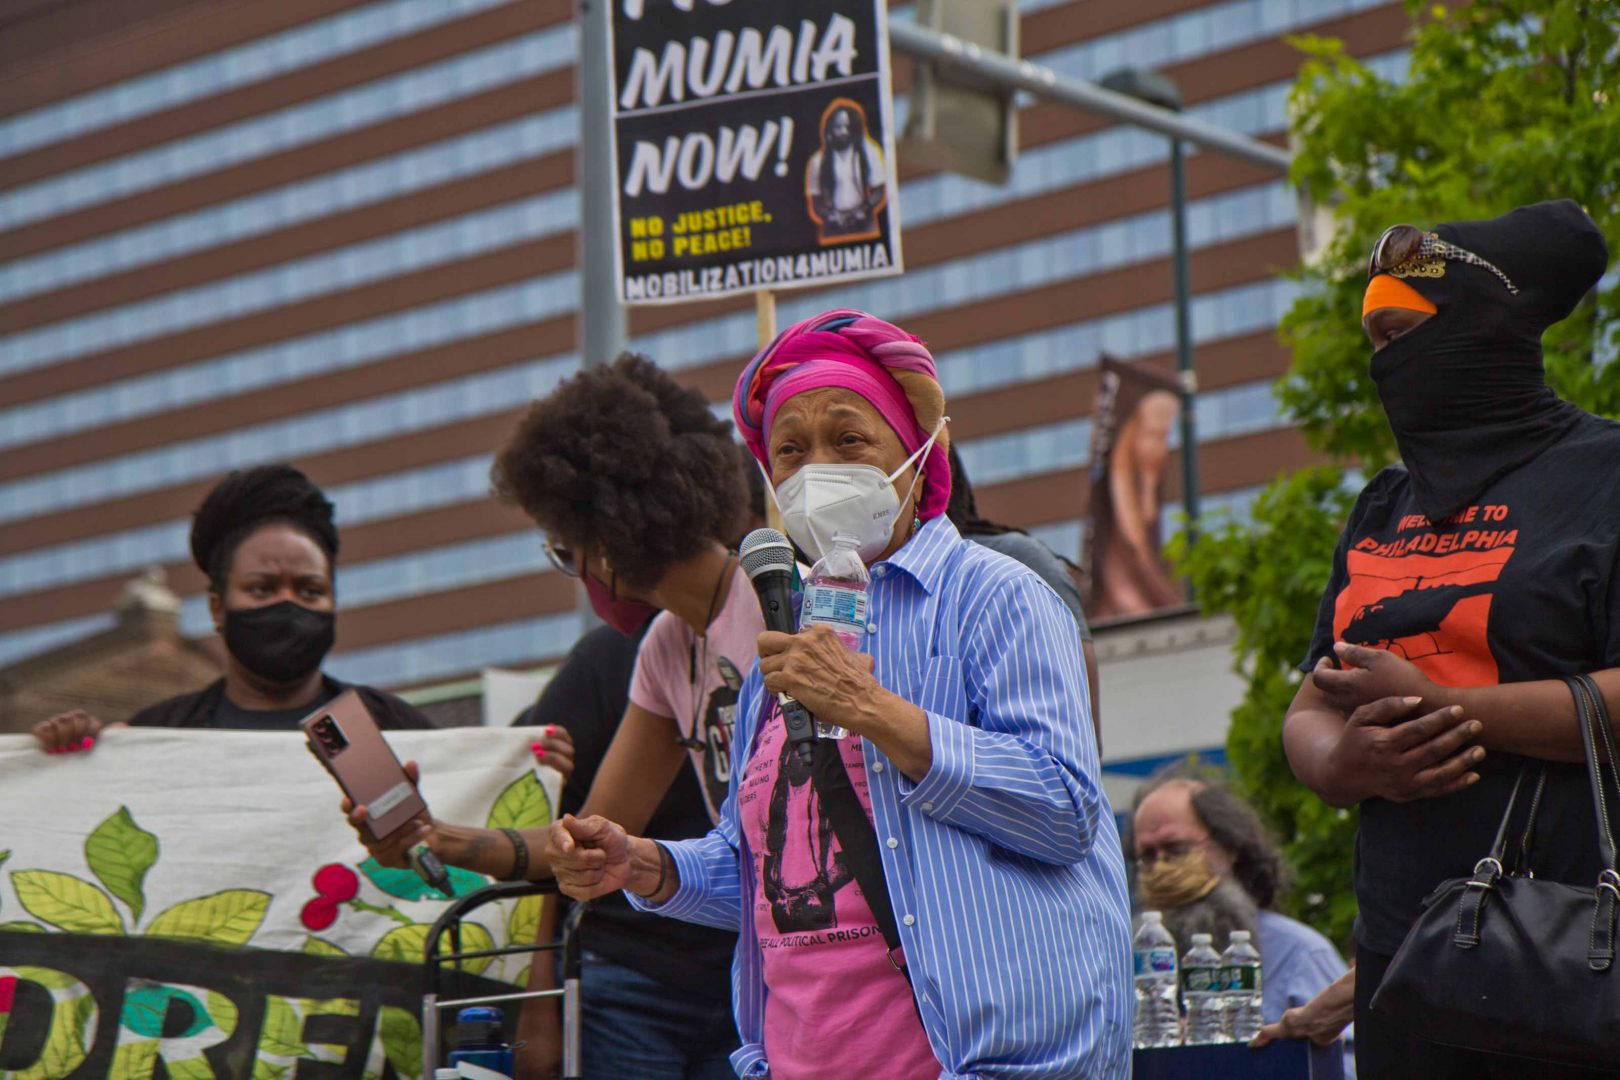 Pam Africa described police abuse her family experienced at a protest outside the Penn Museum on April 28, 2021, over the museum’s mistreatment of the remains of children Tree and Delisha Africa who were killed when Philadelphia police bombed the MOVE Organization’s headquarters in 1985.